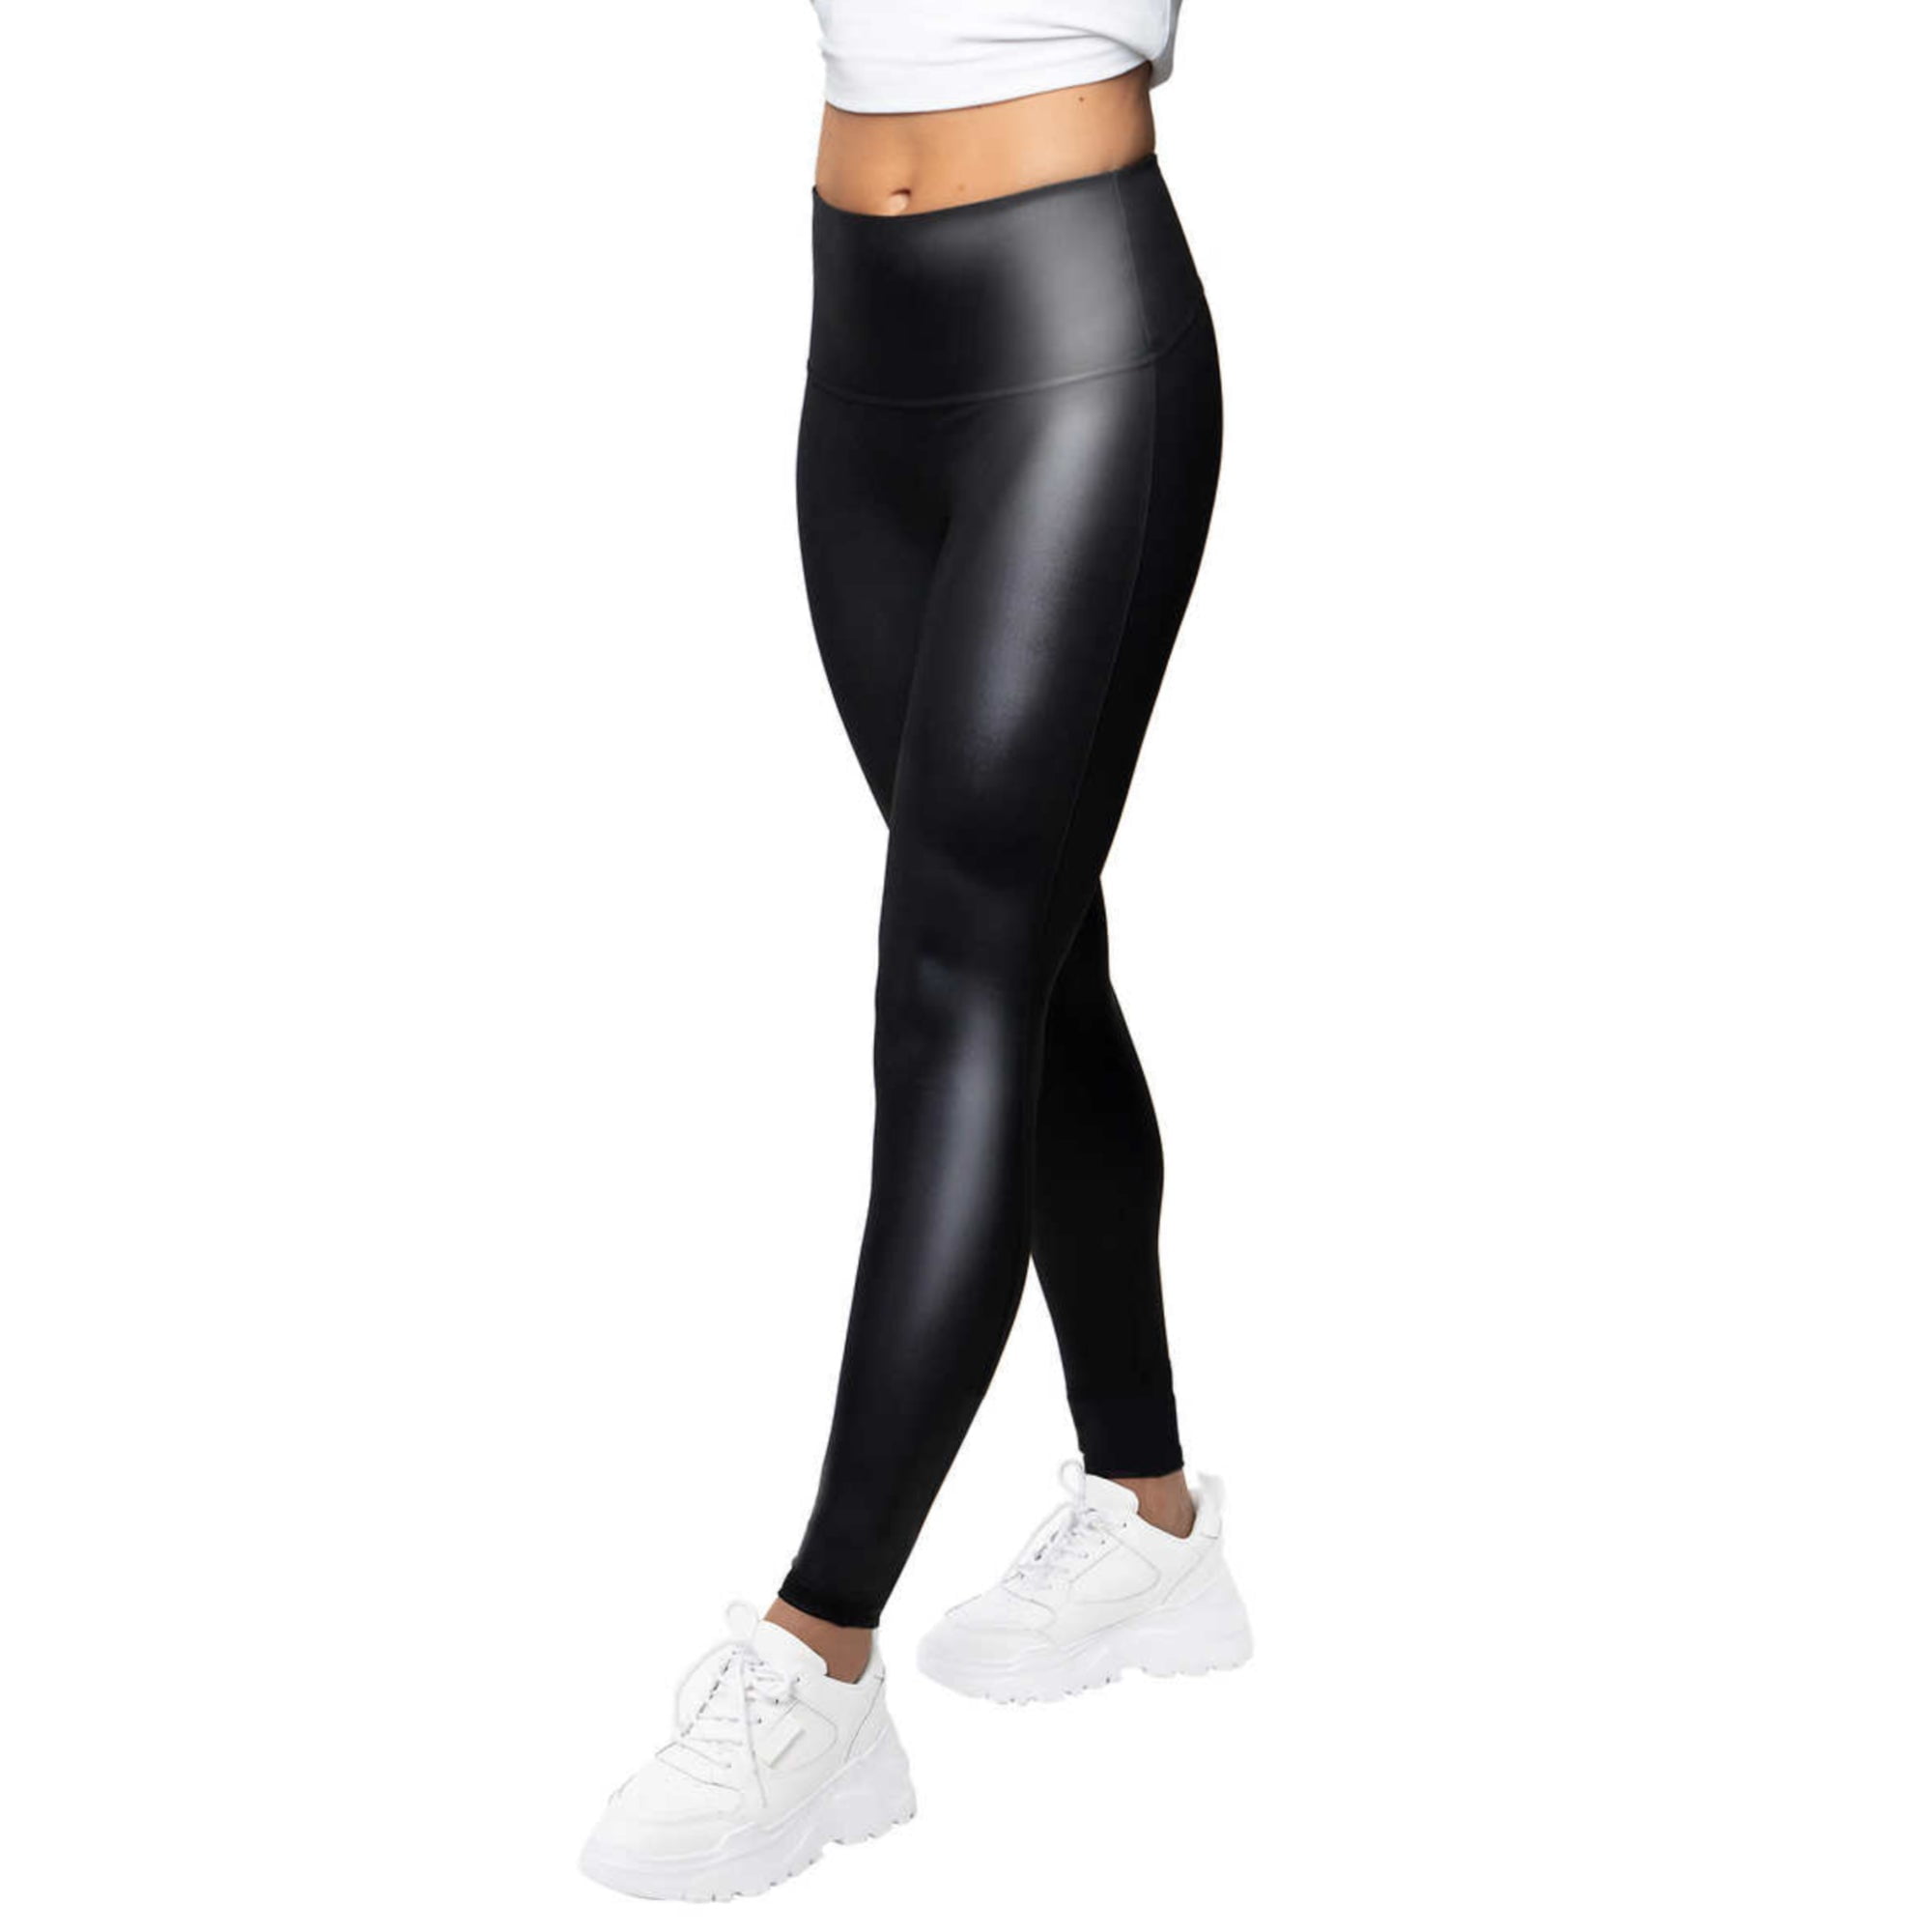 Jane and Bleecker Women's High Rise Soft Faux Leather Leggings-Black / S 